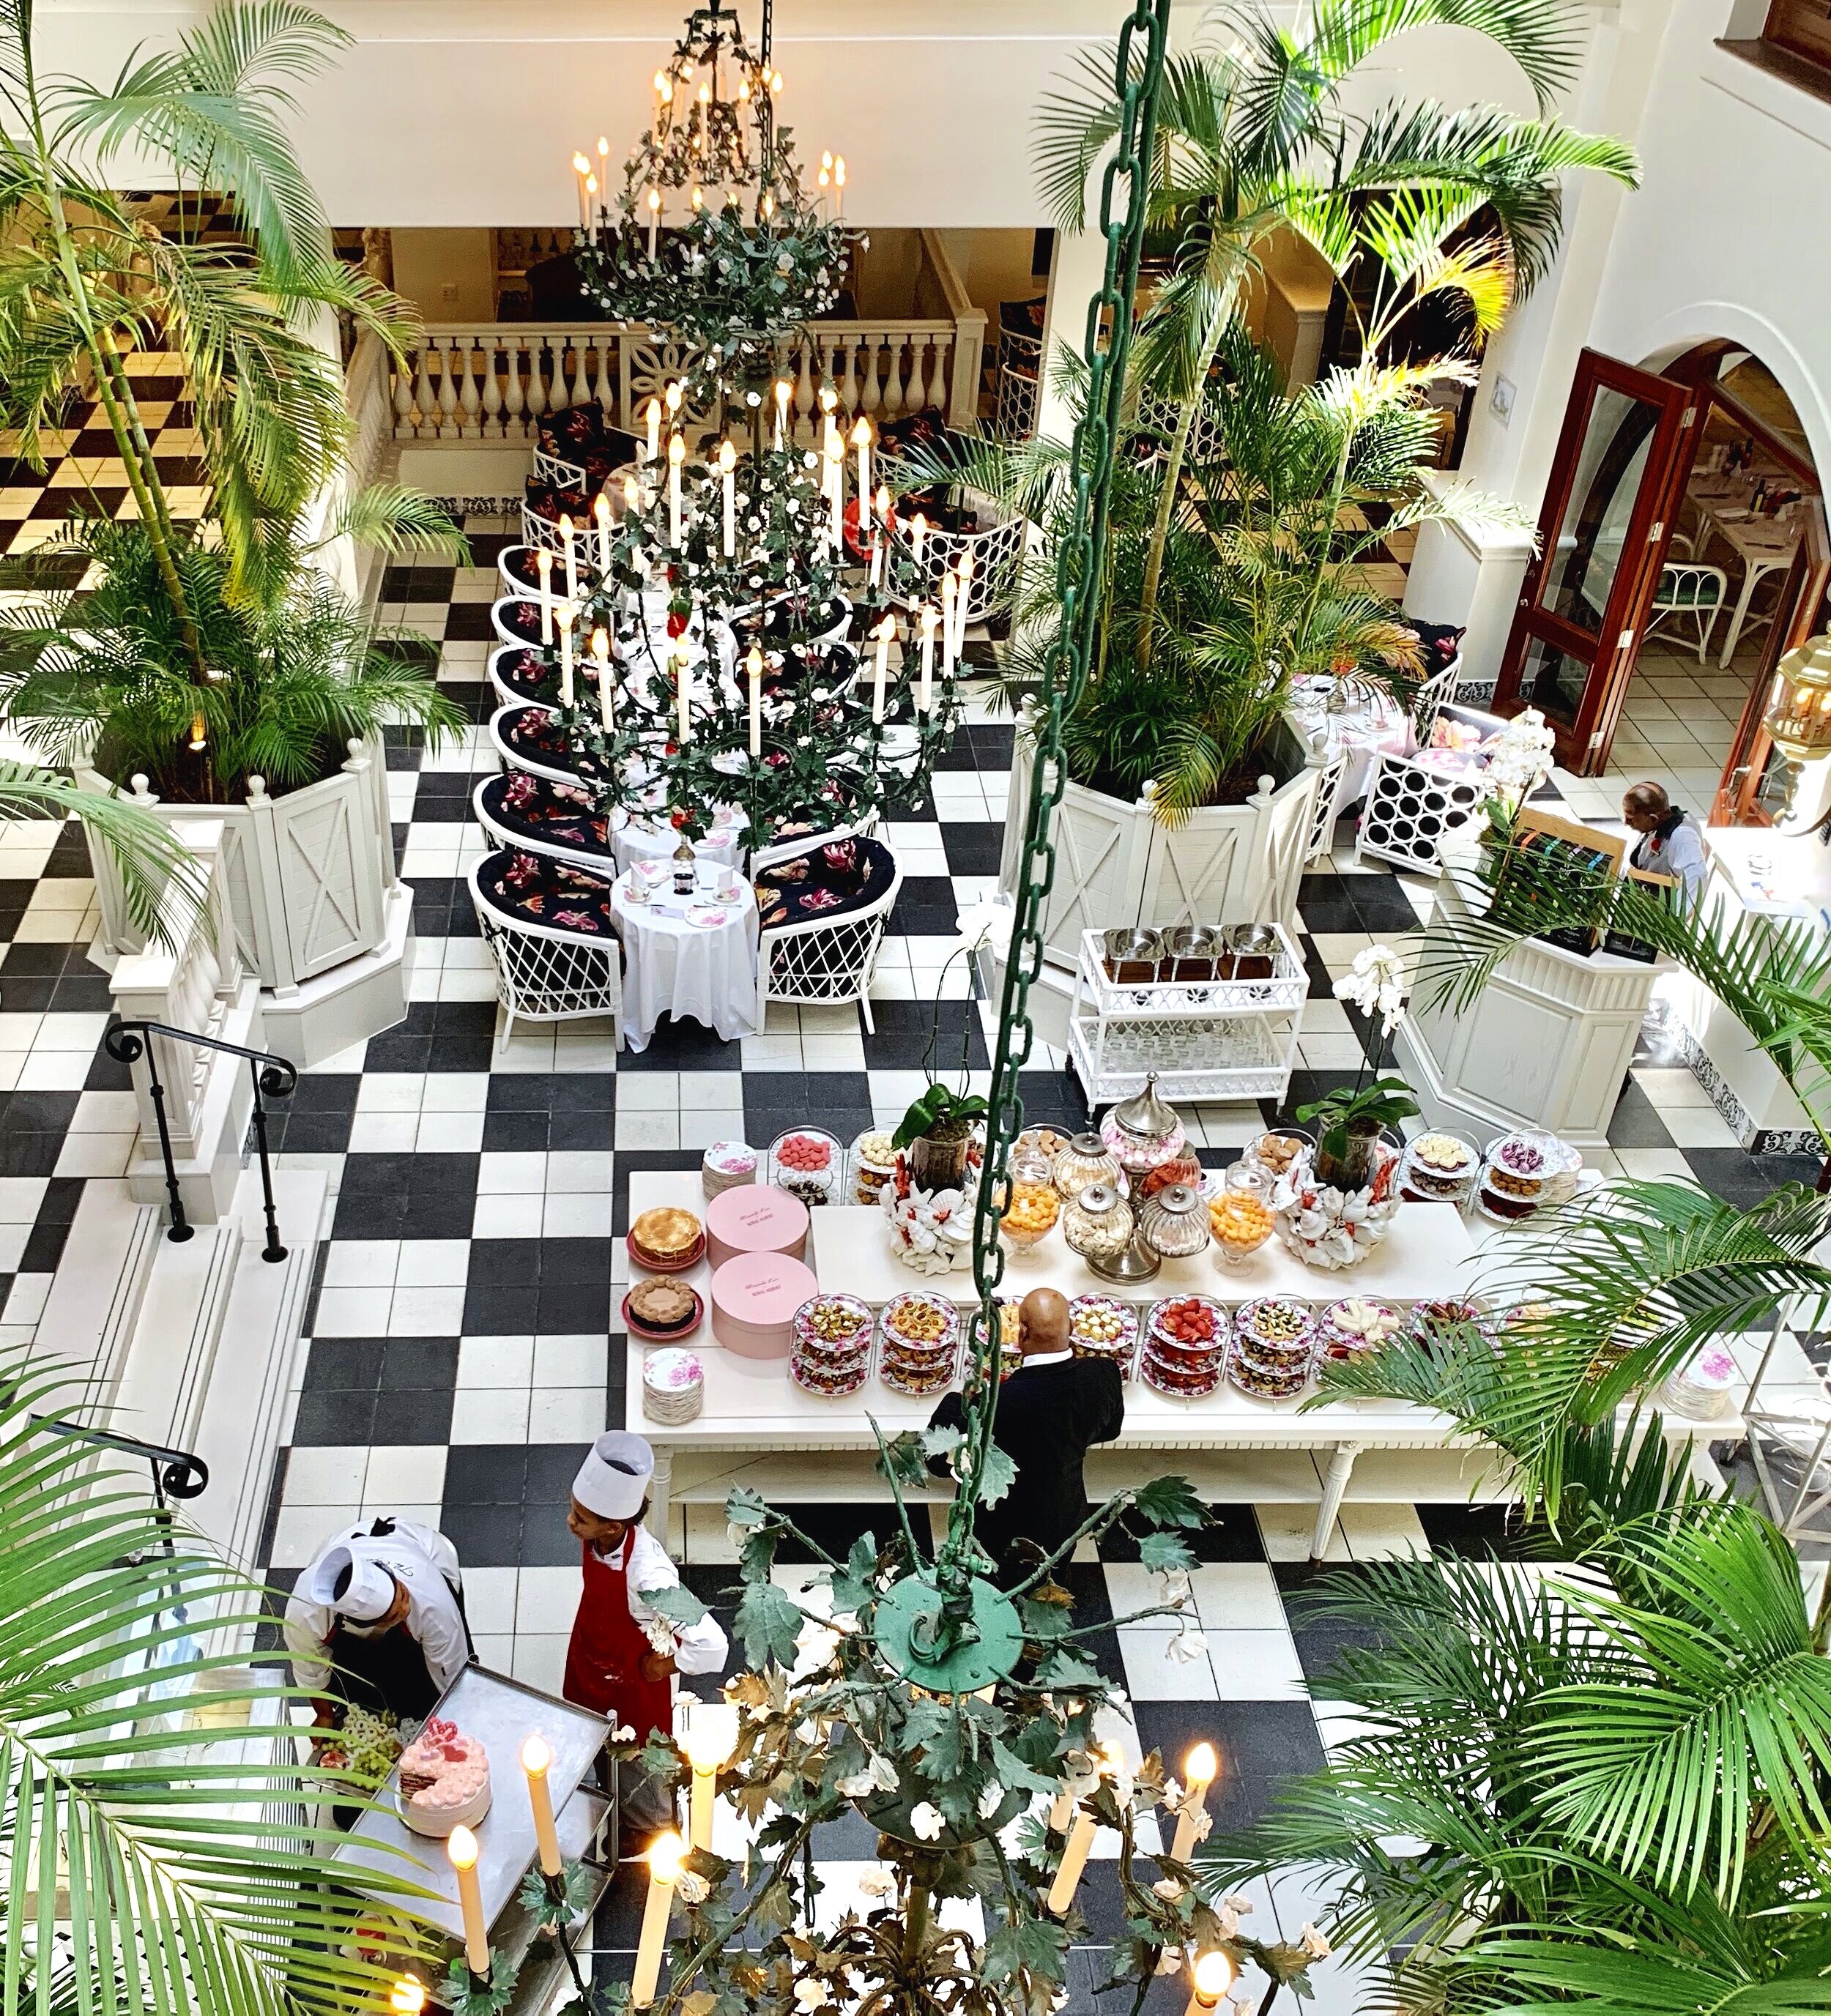  Looking down on Palm Court, the venue for afternoon tea.  